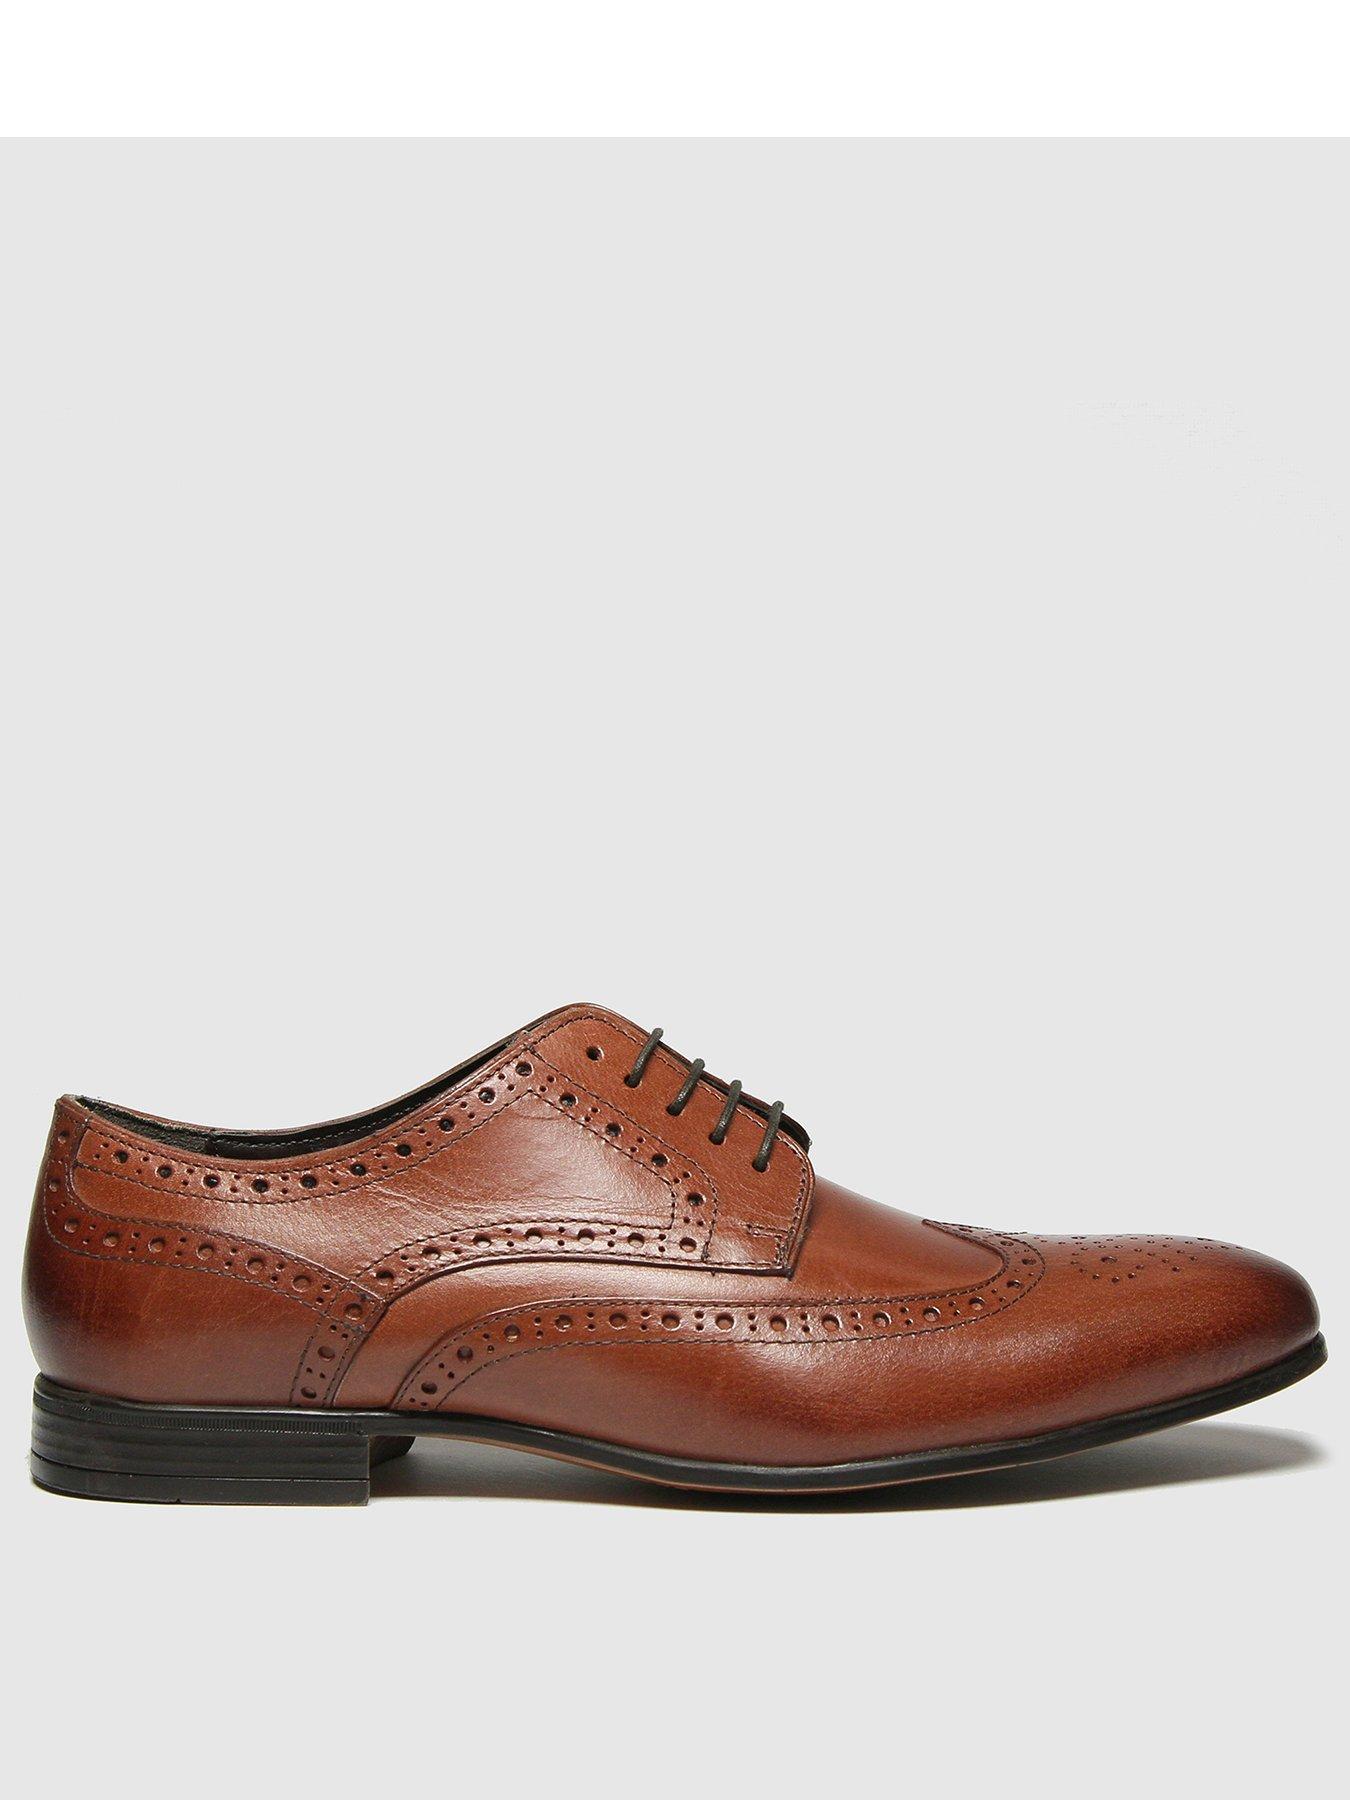 Shoes & boots Rowen Leather Brogue